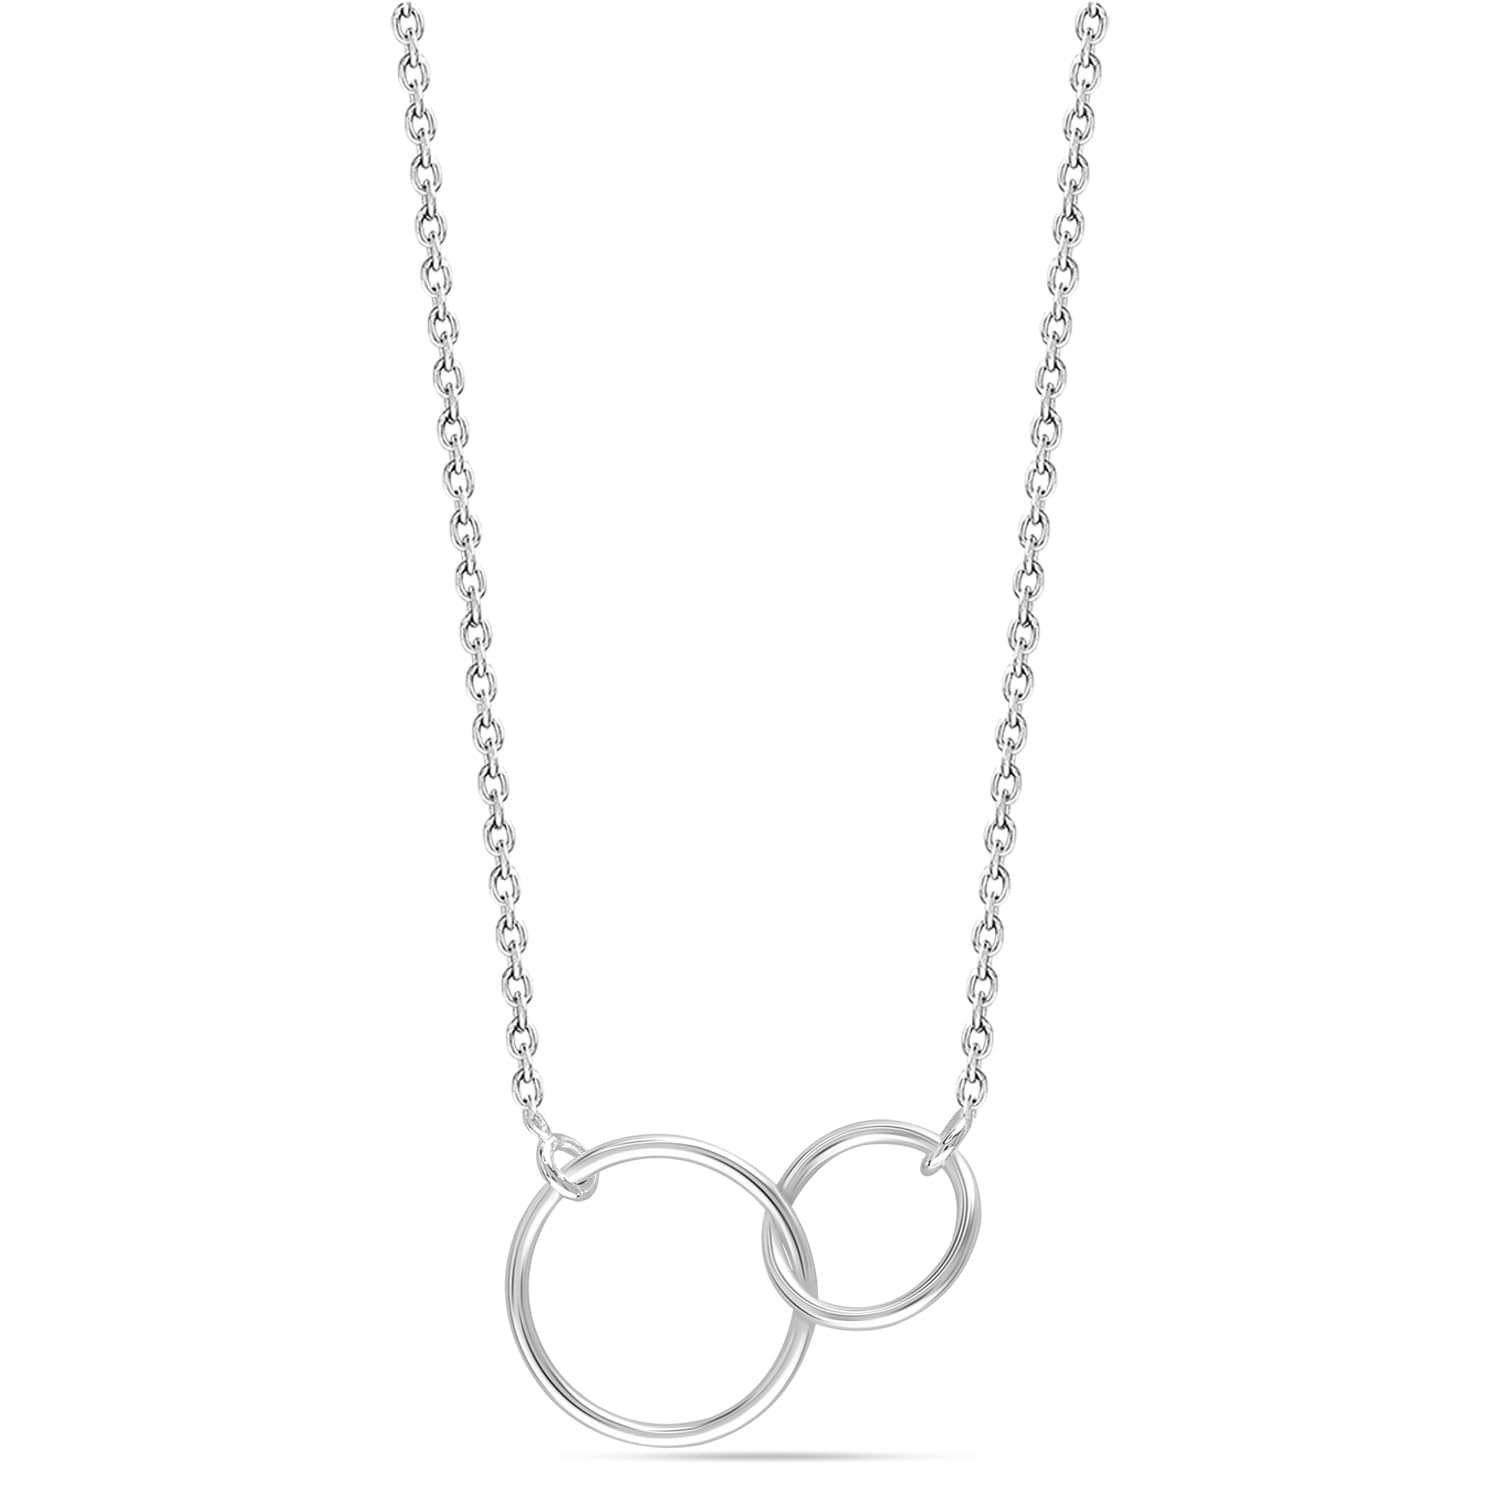 LeCalla 925 Sterling Silver Mother Daughter Necklace, Interlocking Infinity Double Circle Pendant Necklace, Mothers Day Necklace, Mother's Day Jewelry, First Mothers Day Gifts - Mothers Day Gift - image 5 of 5